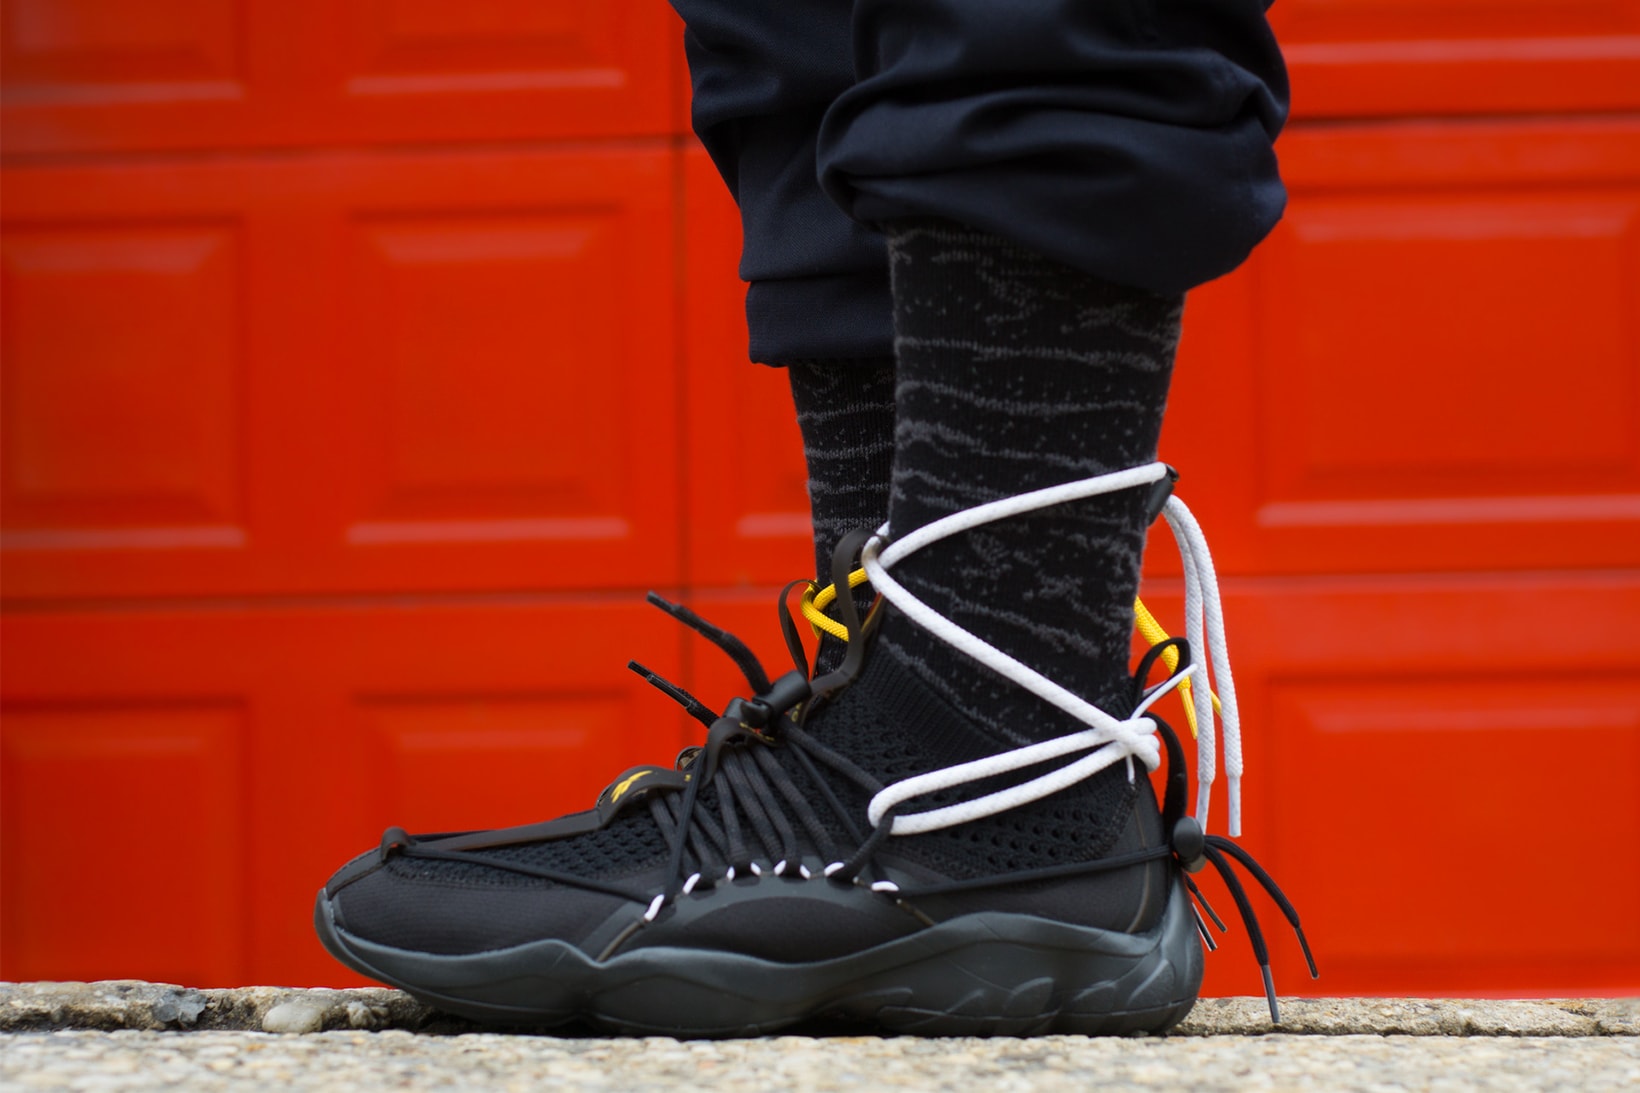 Pyer Moss Reebok DMX Fusion Experiment Friends Family black yellow 2018 sneakers shoes footwear